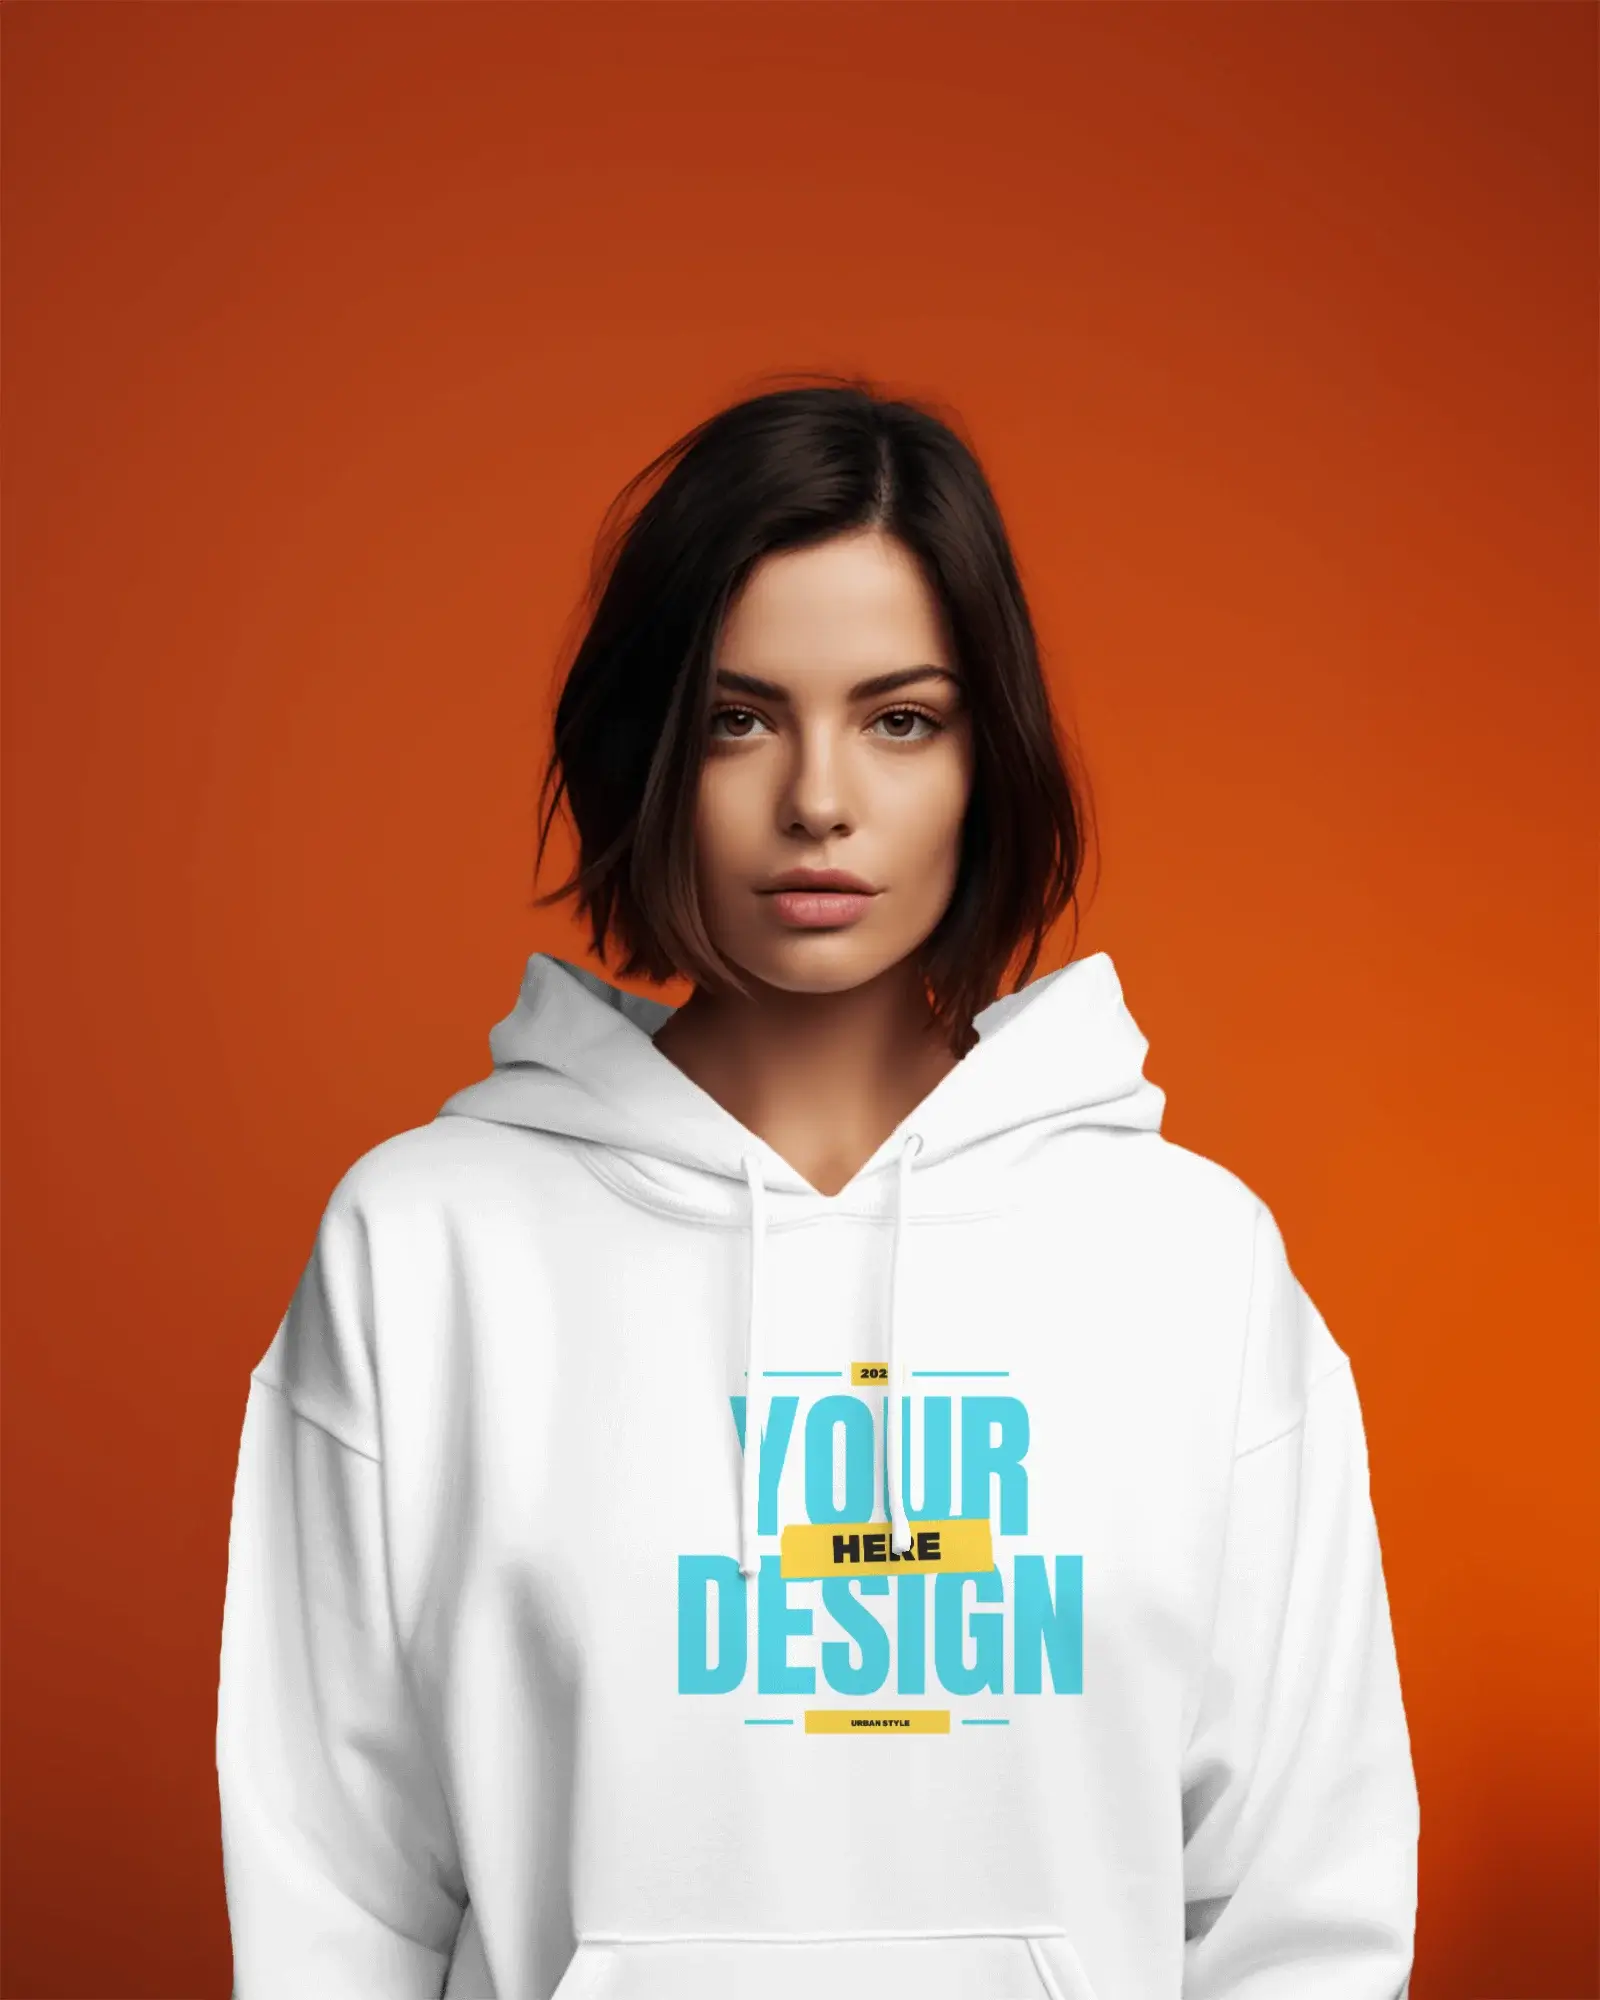 Ai Woman wearing hoodie in front of orange background